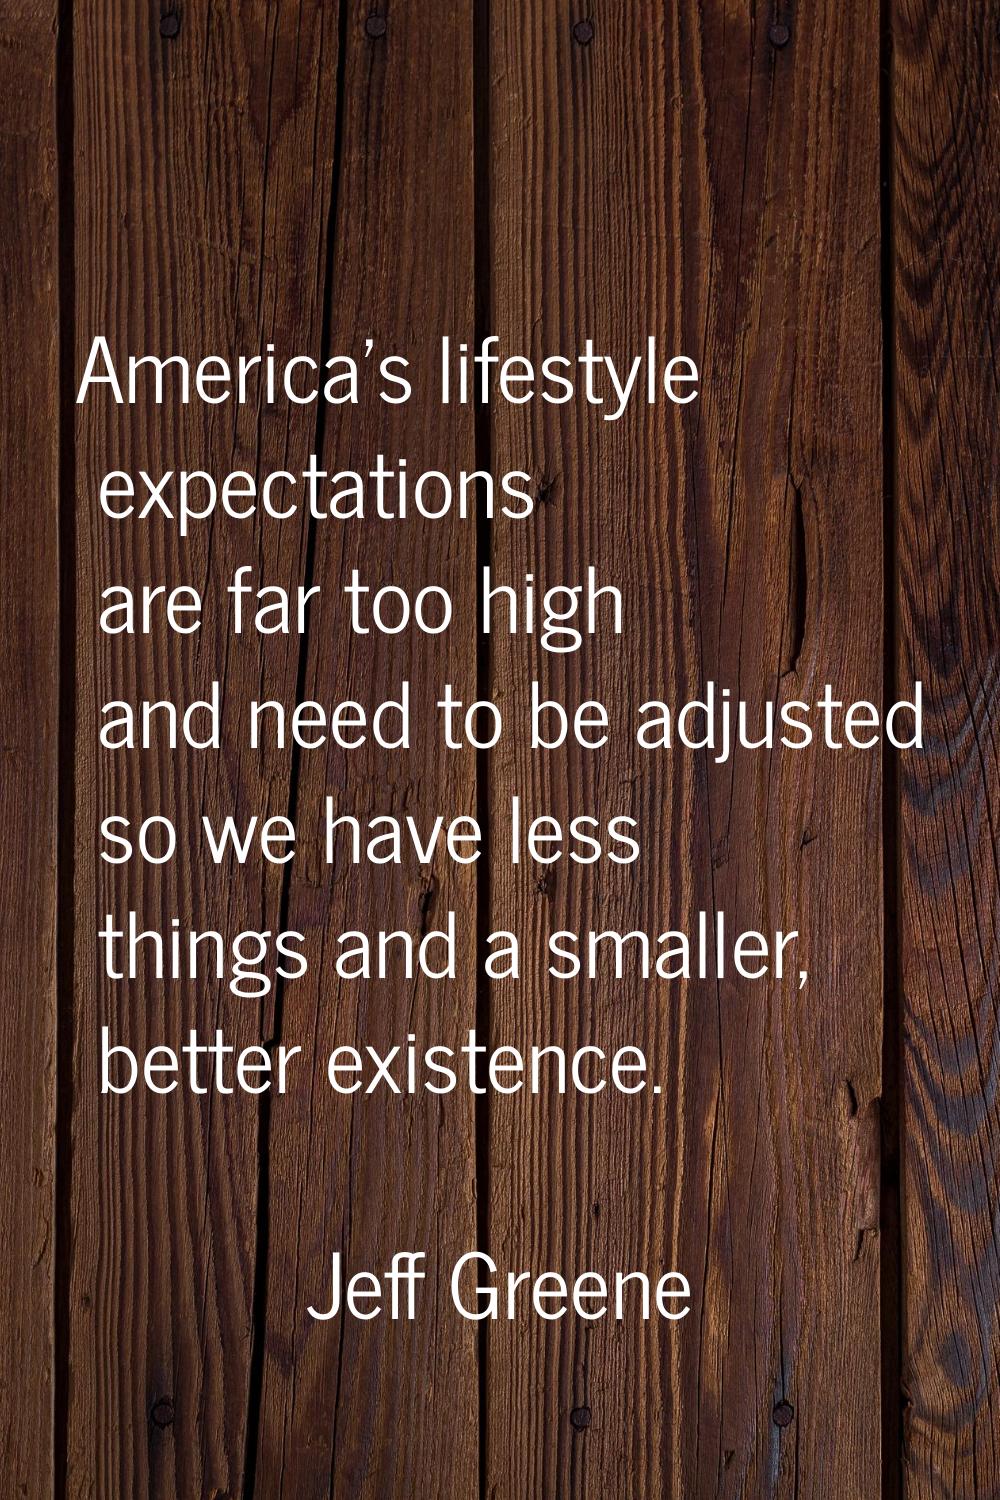 America's lifestyle expectations are far too high and need to be adjusted so we have less things an